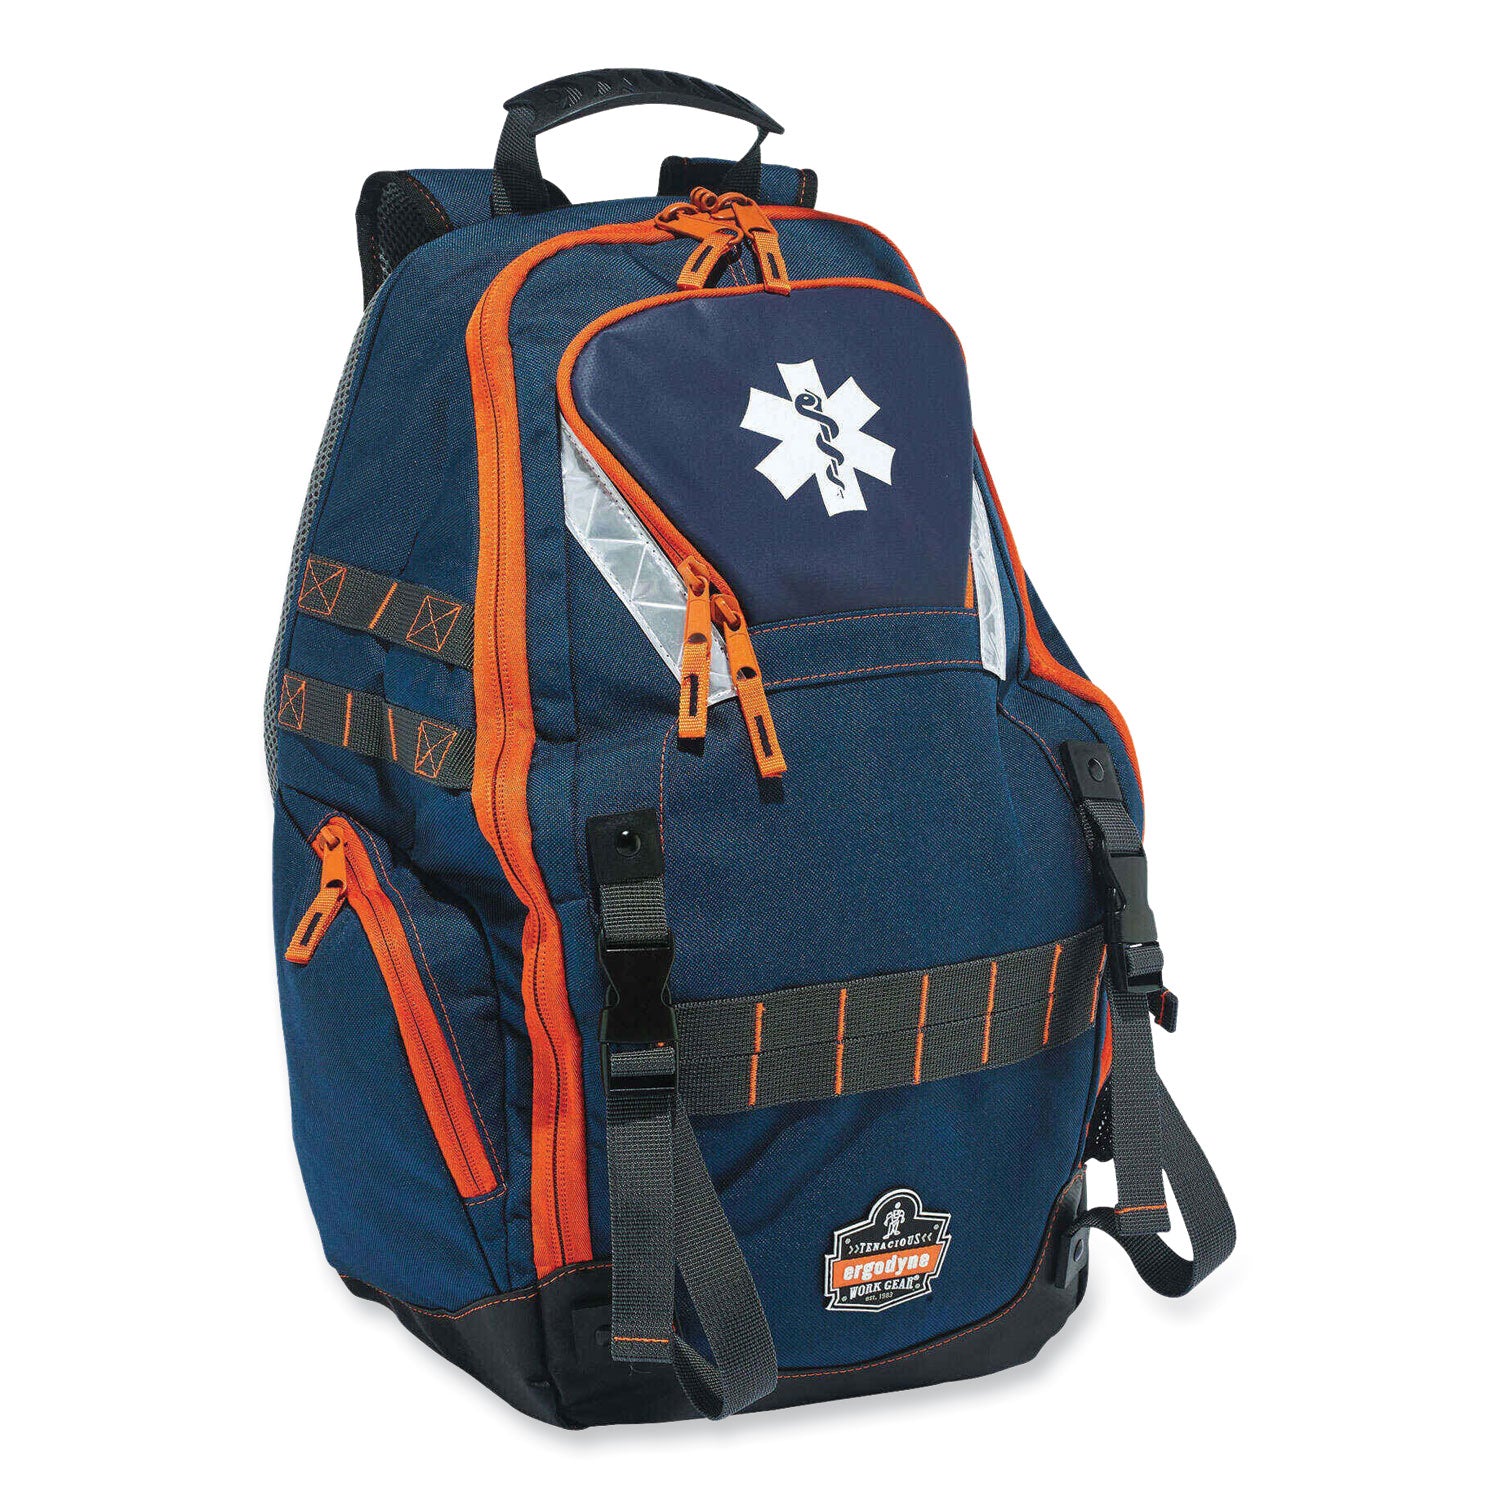 arsenal-5244-responder-backpack-8-x-145-x-20-blue-ships-in-1-3-business-days_ego13497 - 3